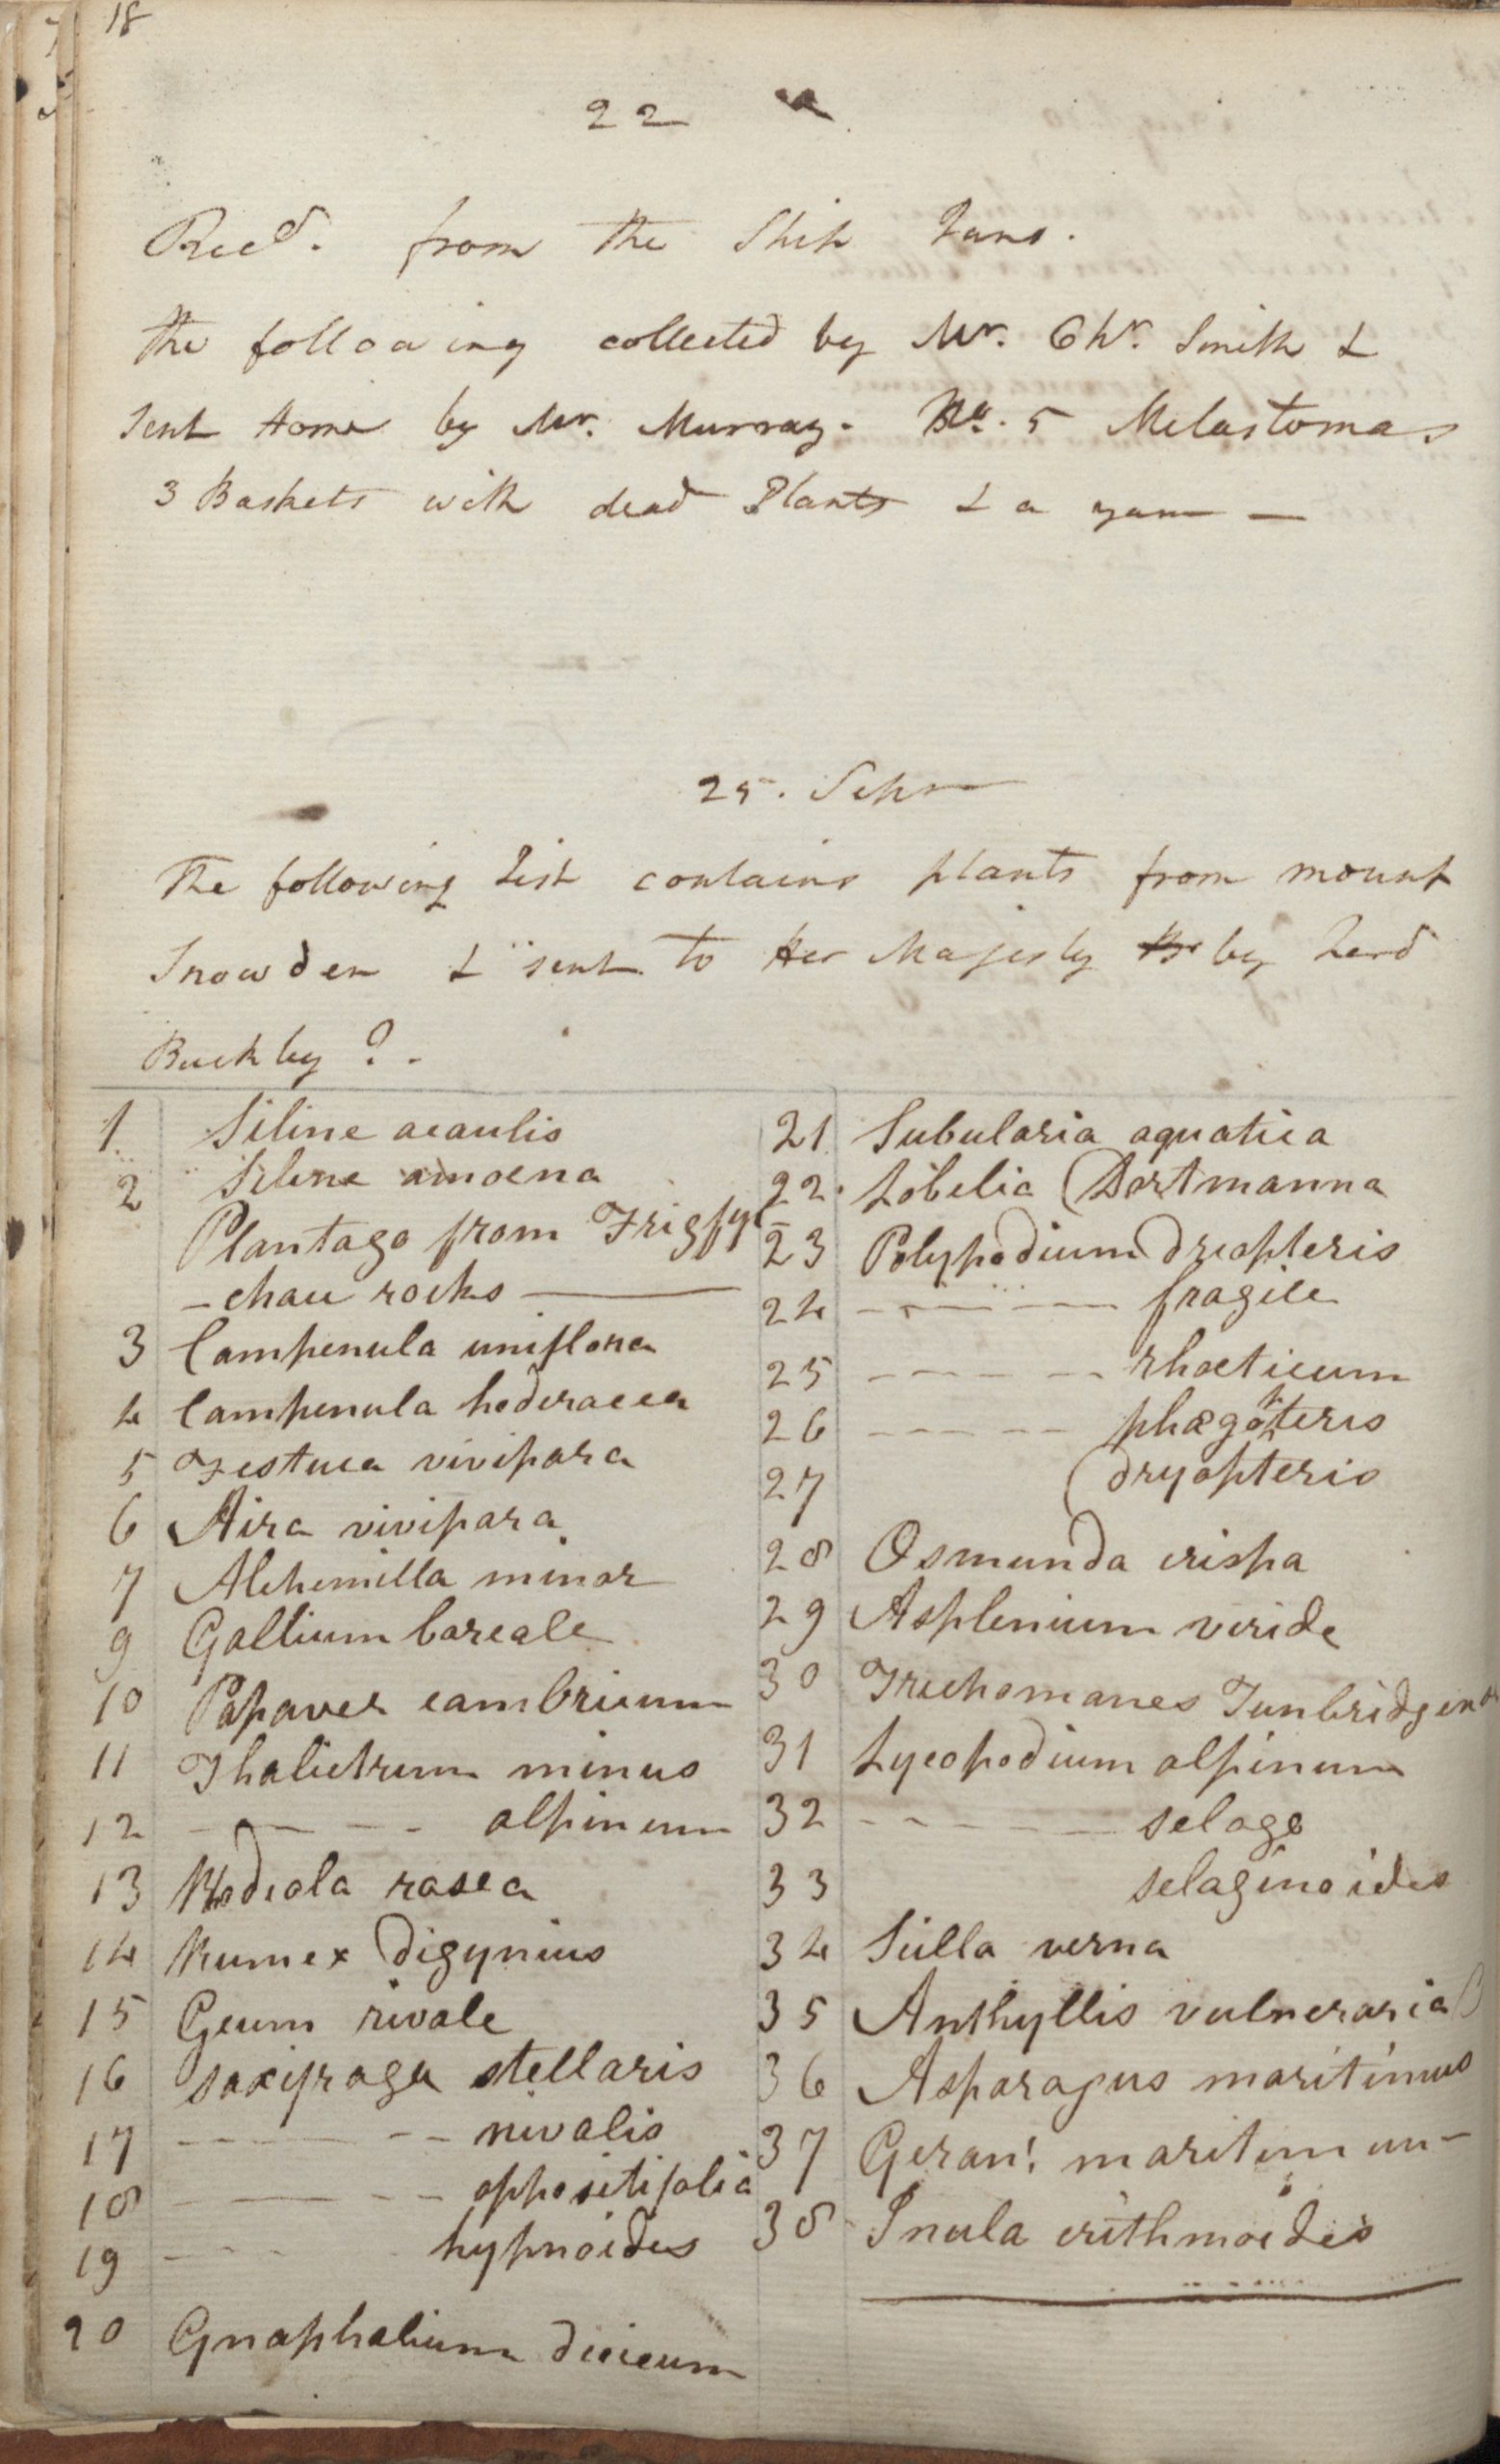 Page 18 of the Kew Record Book with handwritten list of plants